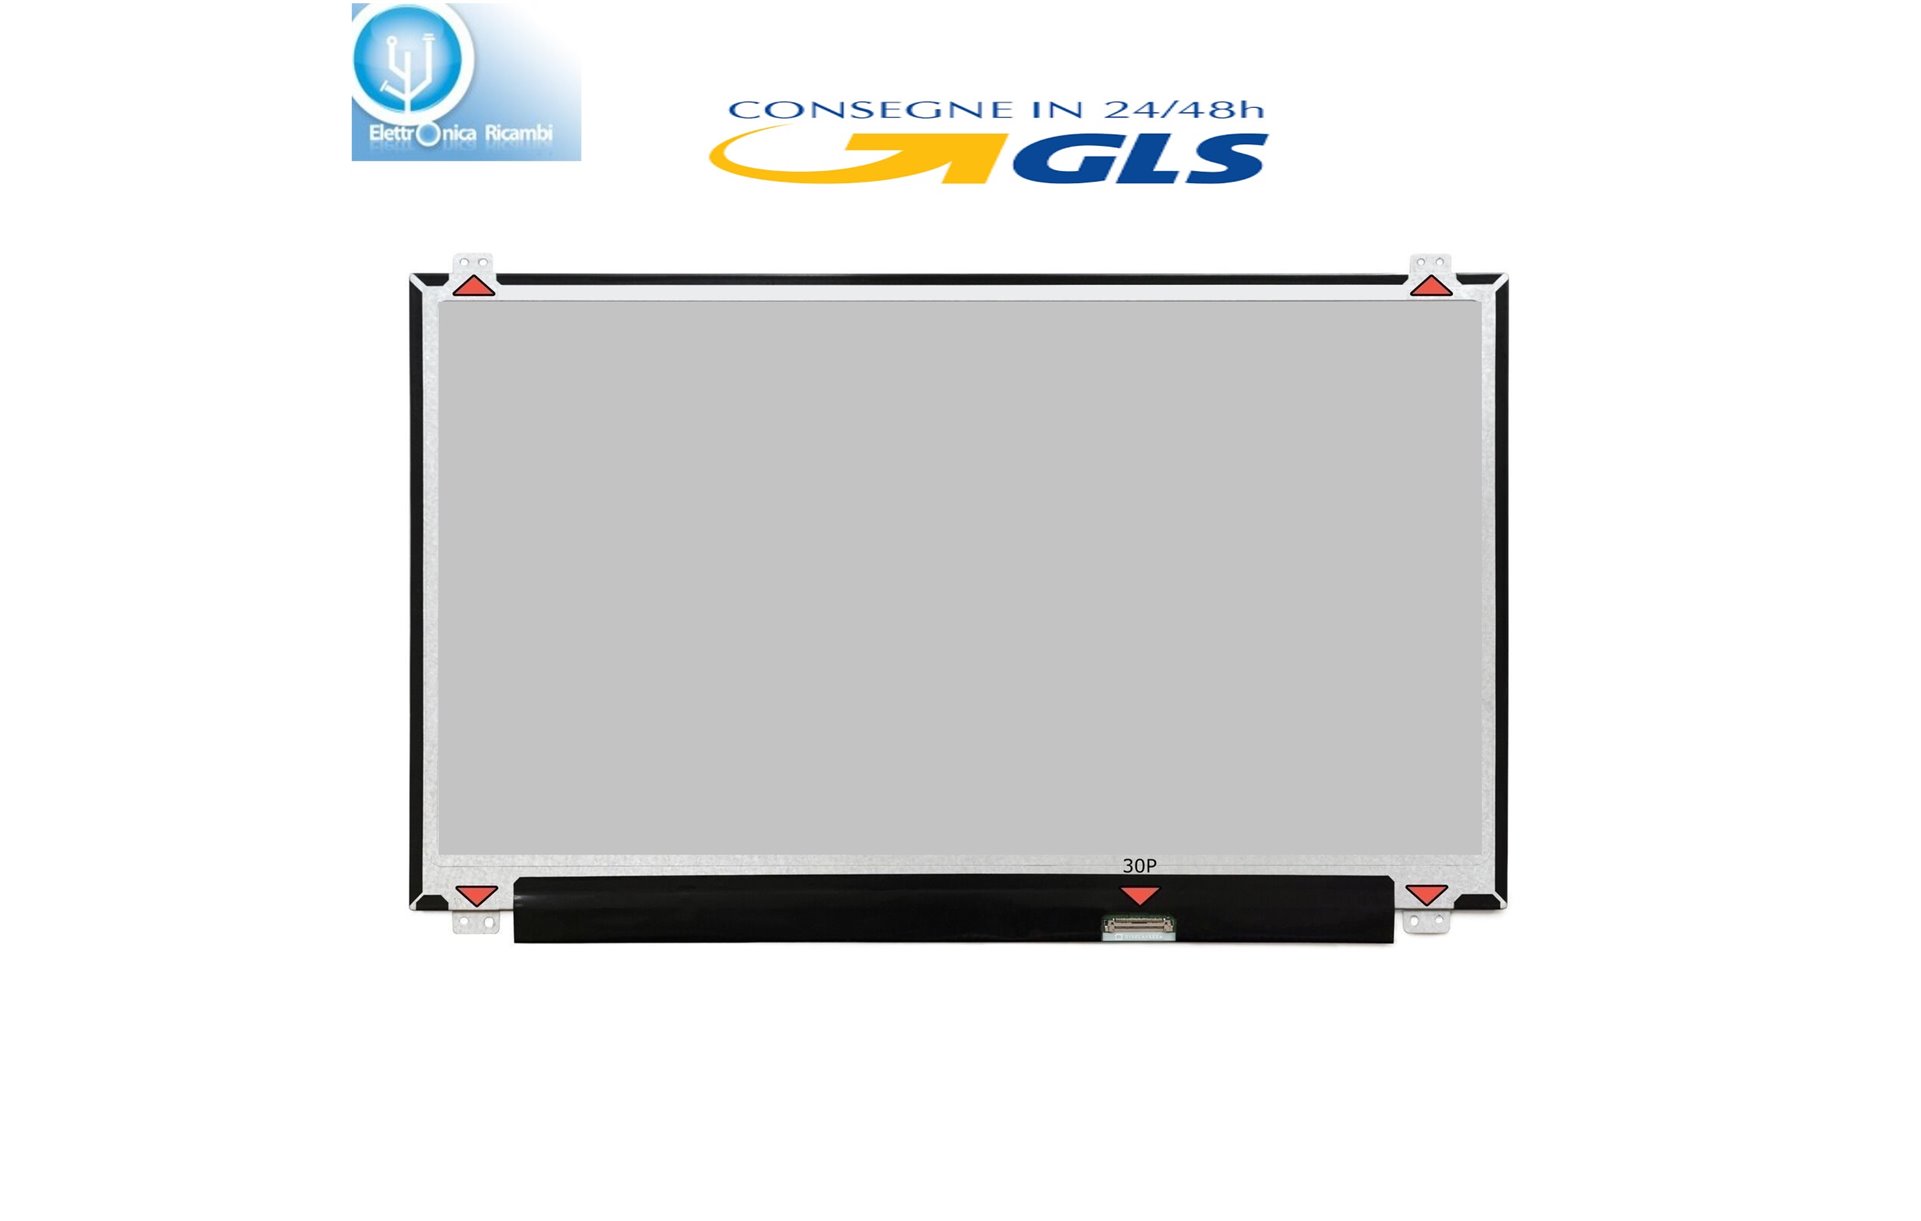 DISPLAY LCD Acer TRAVELMATE 258-M-32ZM SERIES 15.6 WideScreen (13.6"x7.6") LED